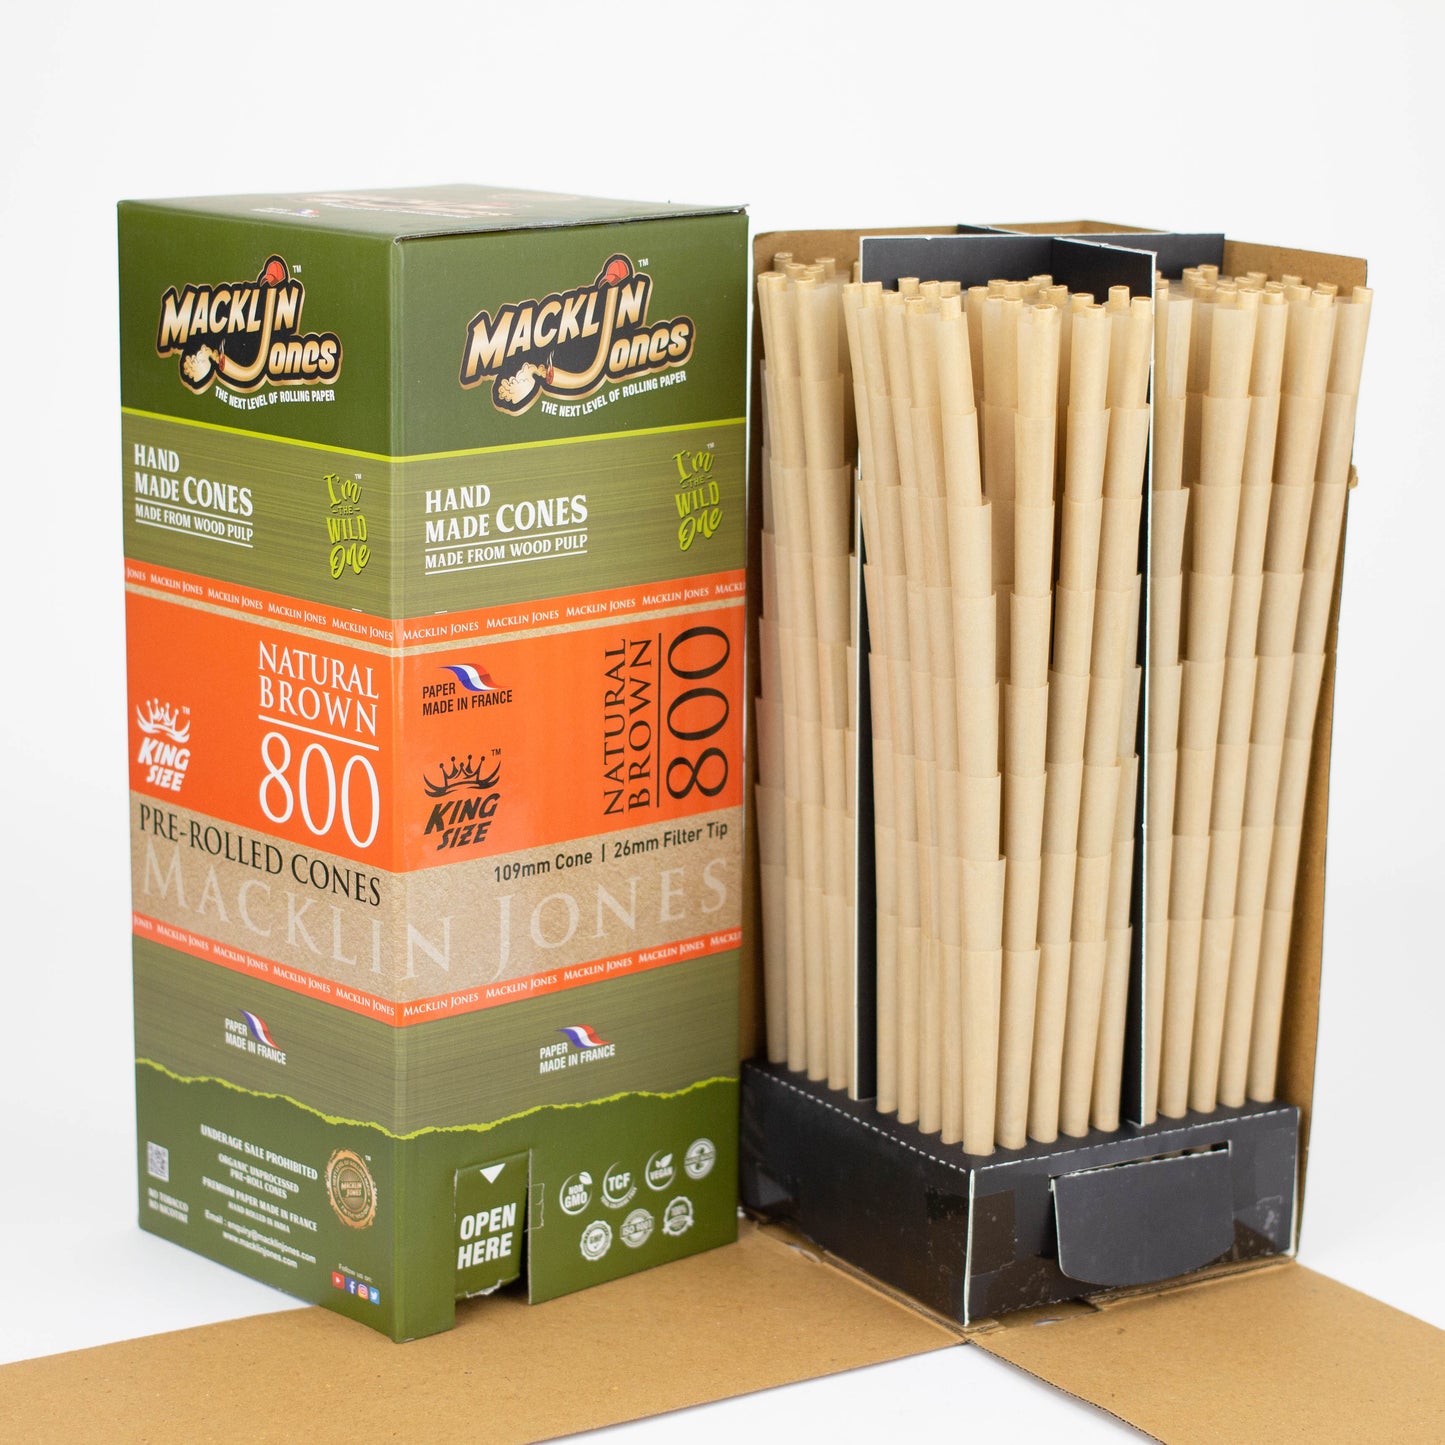 Macklin Jones - Natural Brown King Size Pre-Rolled cones Tower 800_2